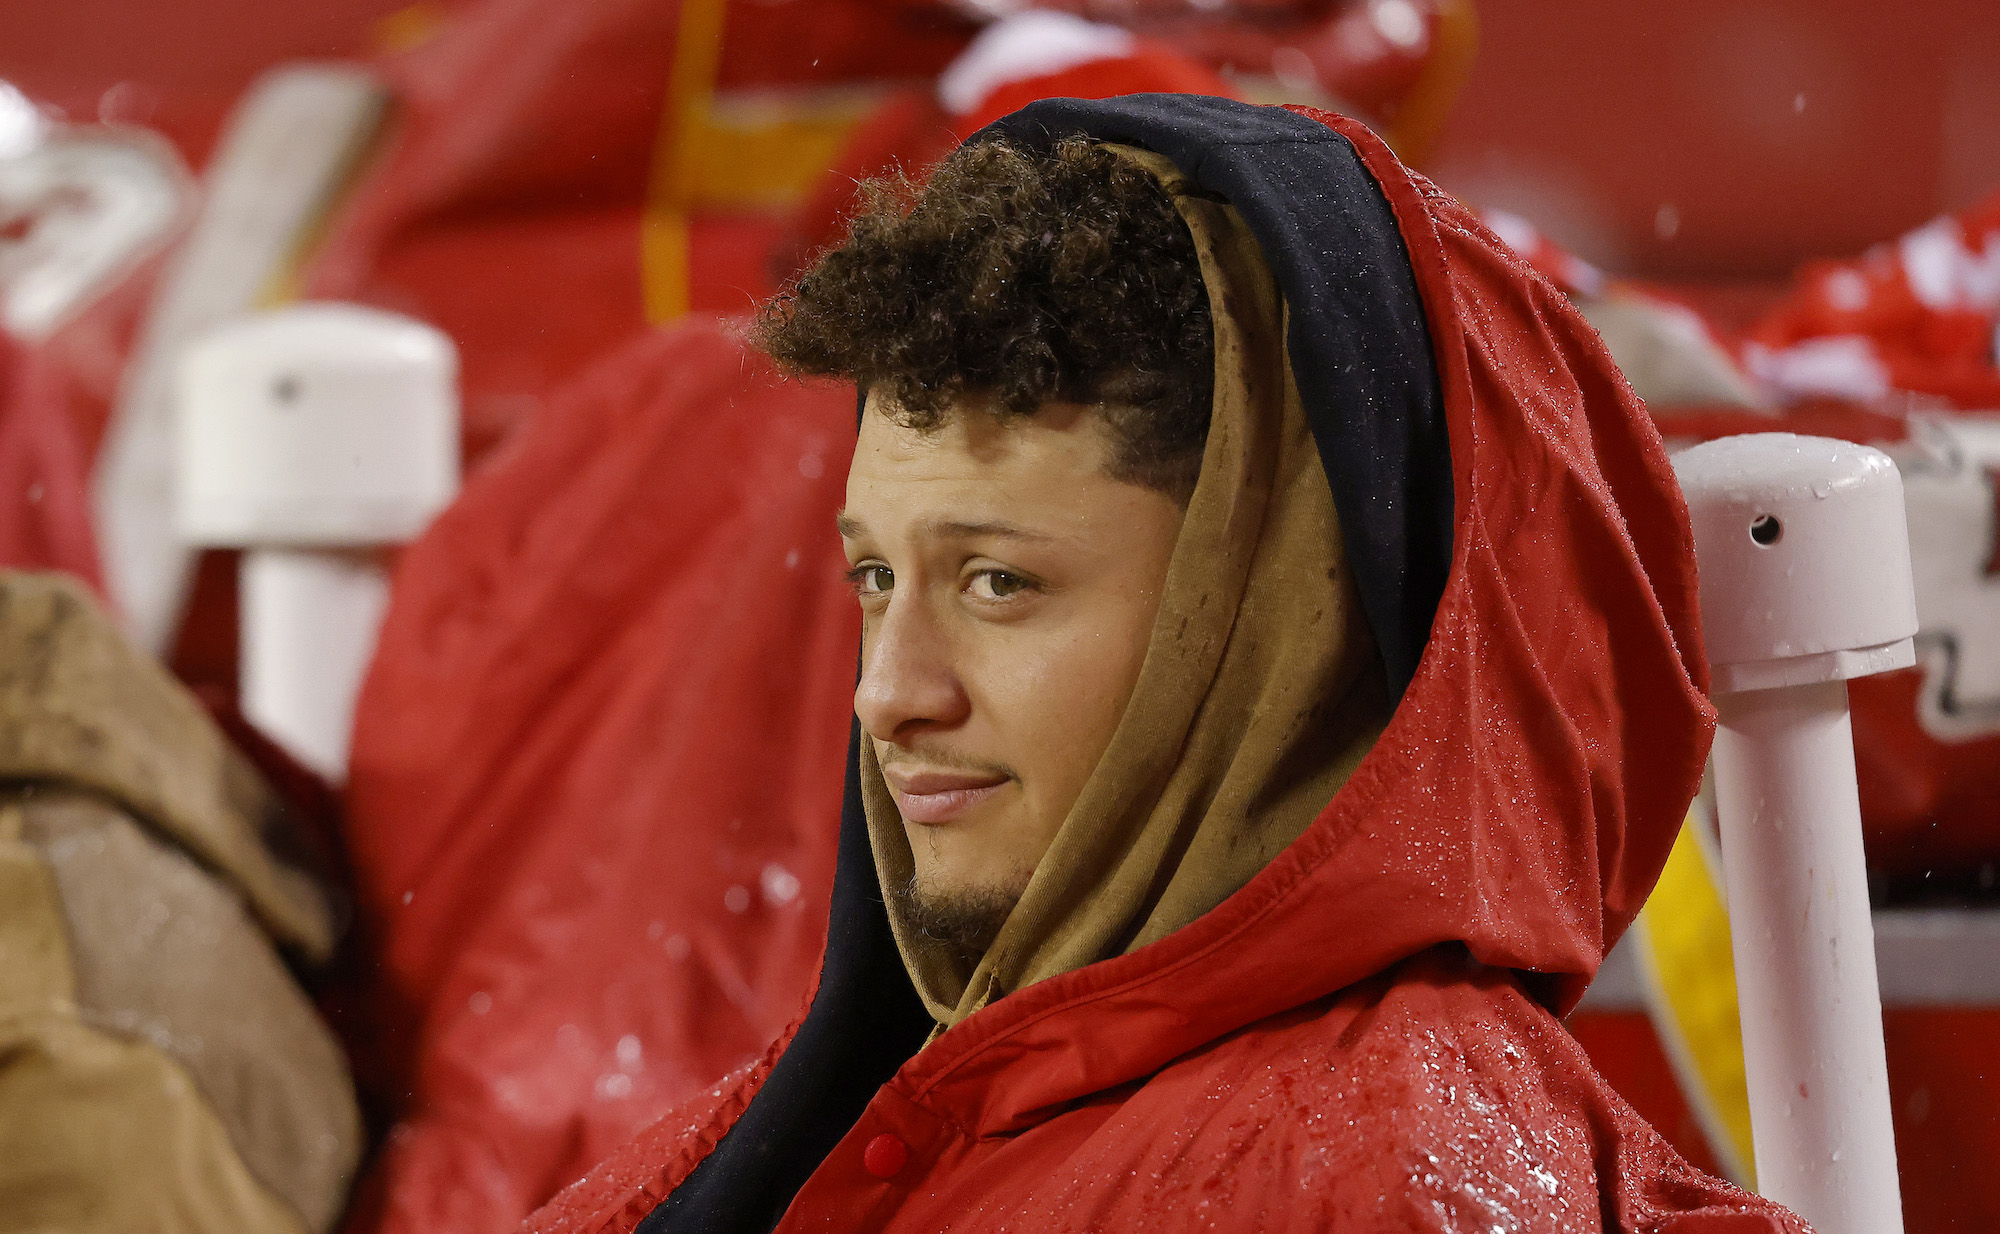 patrick mahomes regrets yelling at referees and complaining to josh allen after penalty erased touchdown vs. bills